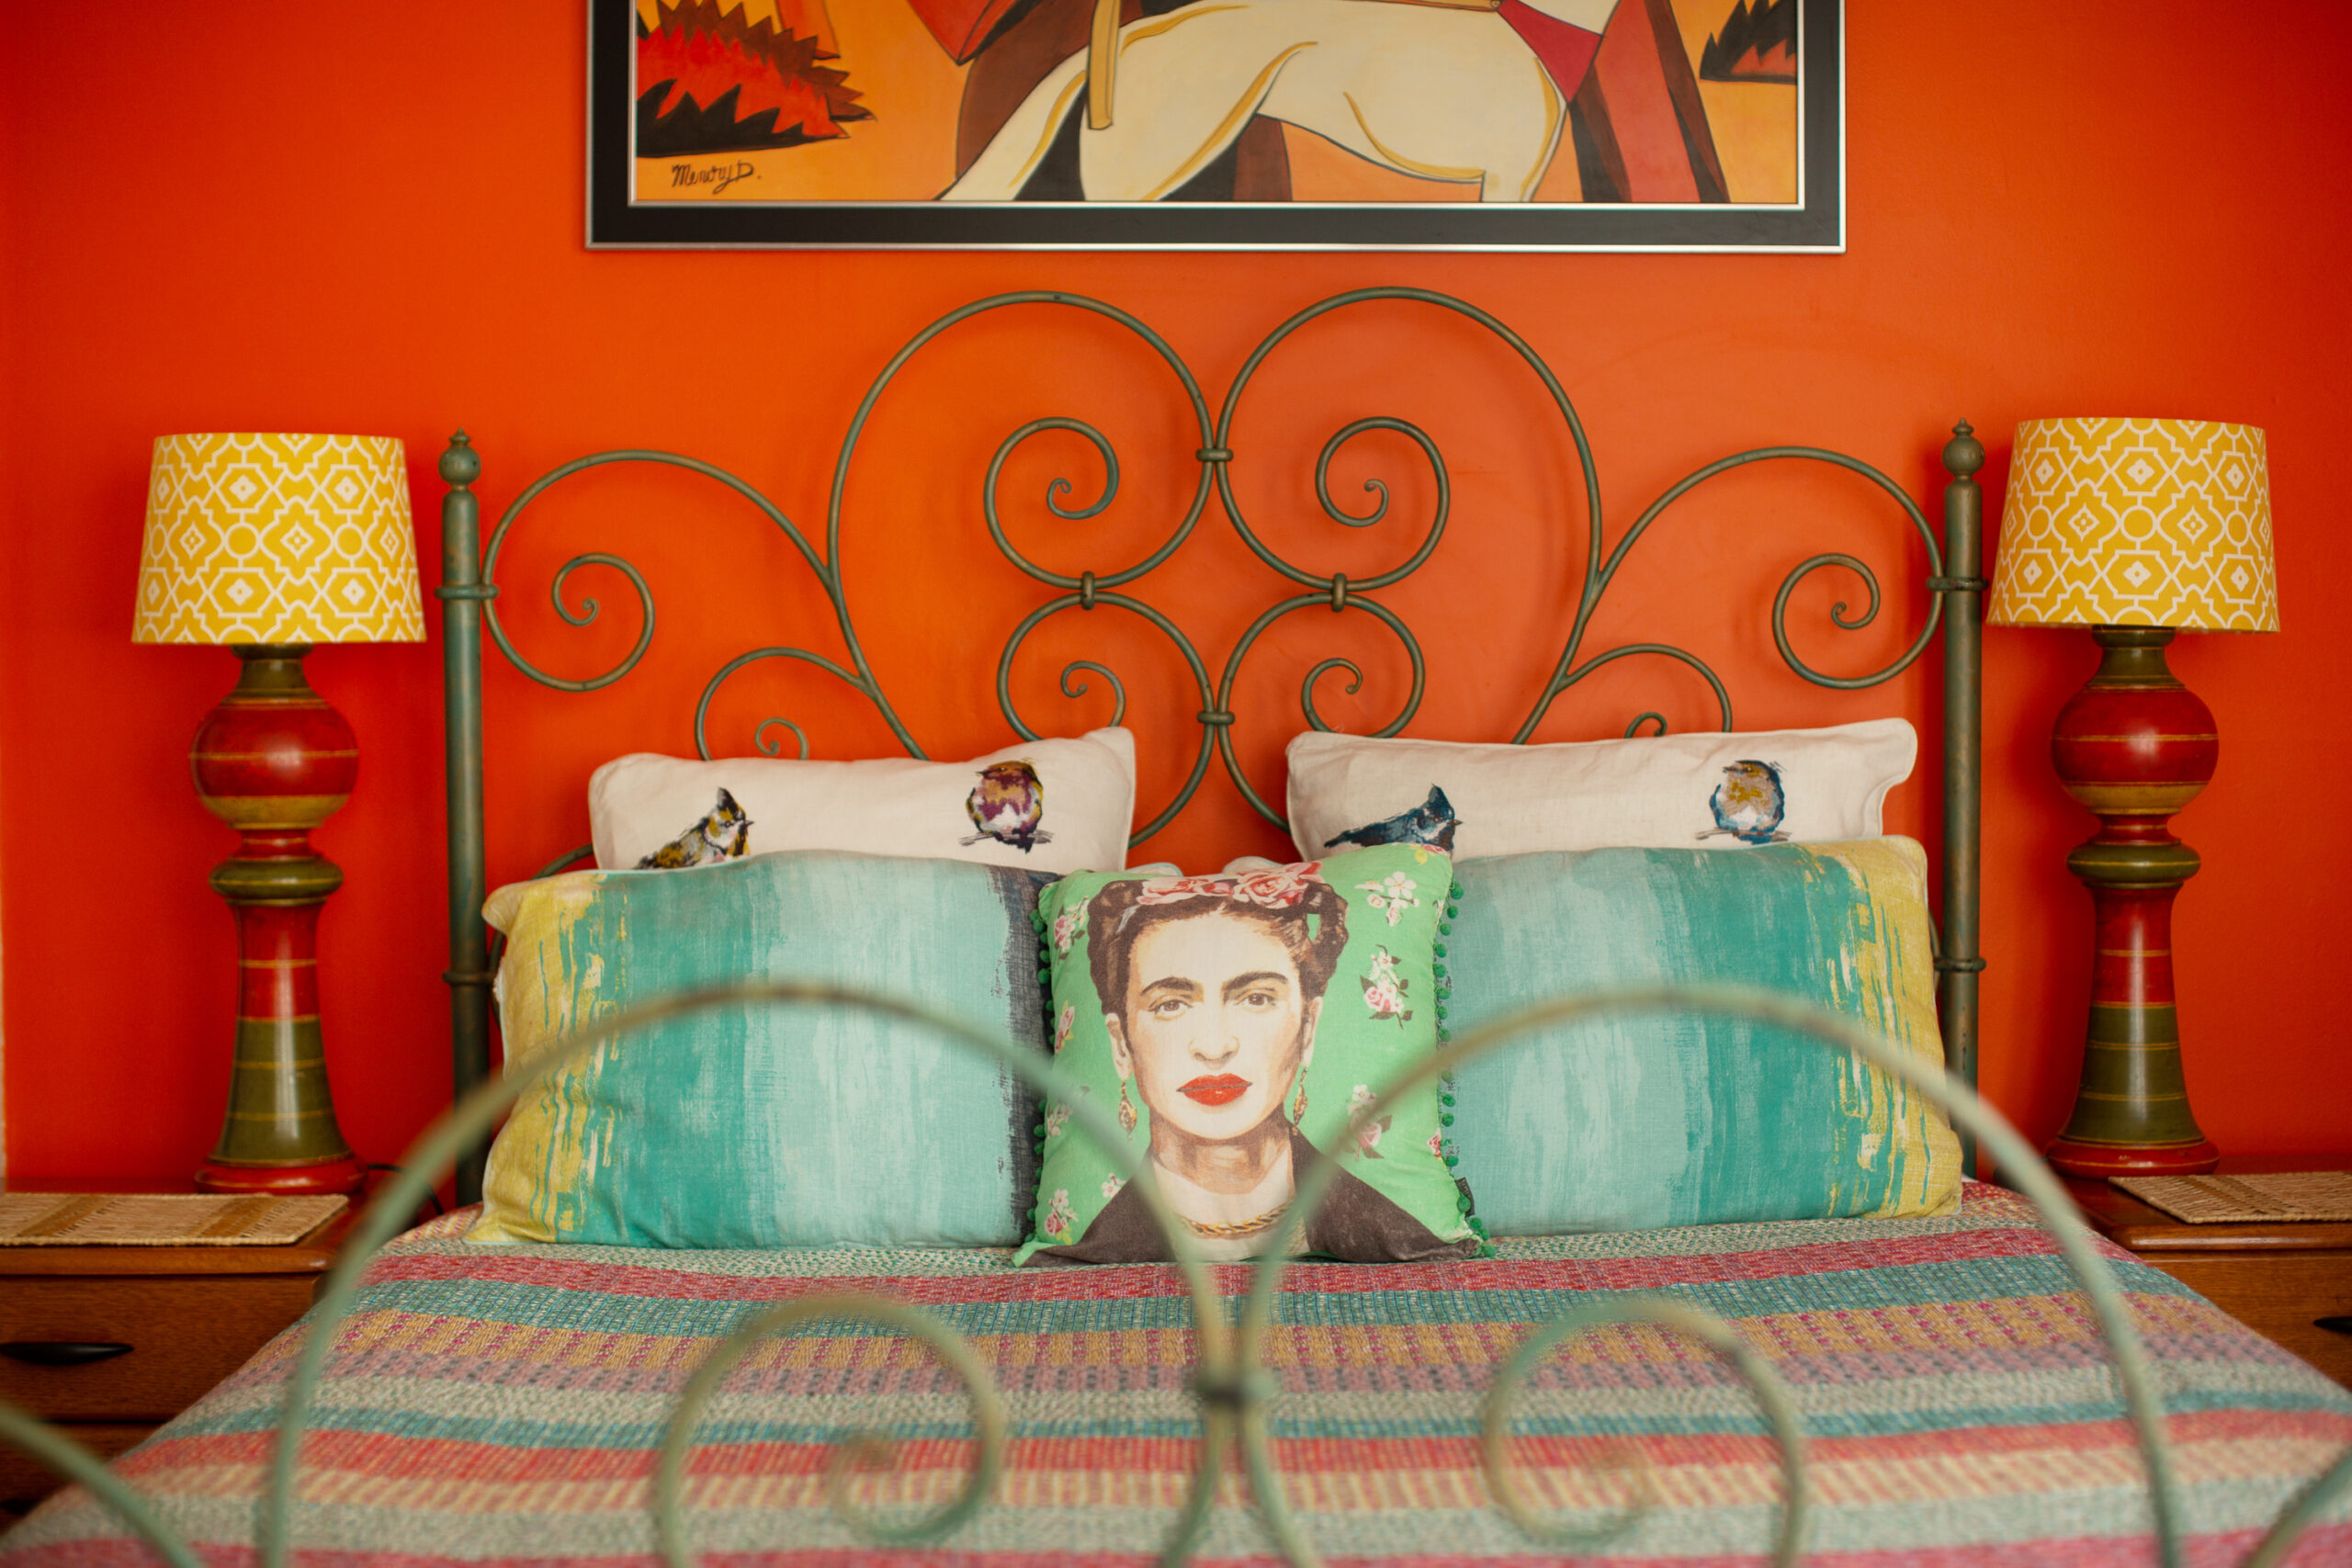 Photo of a bed against an orange wall. The pillow in the middle has a picture of Frida Kahlo on it.